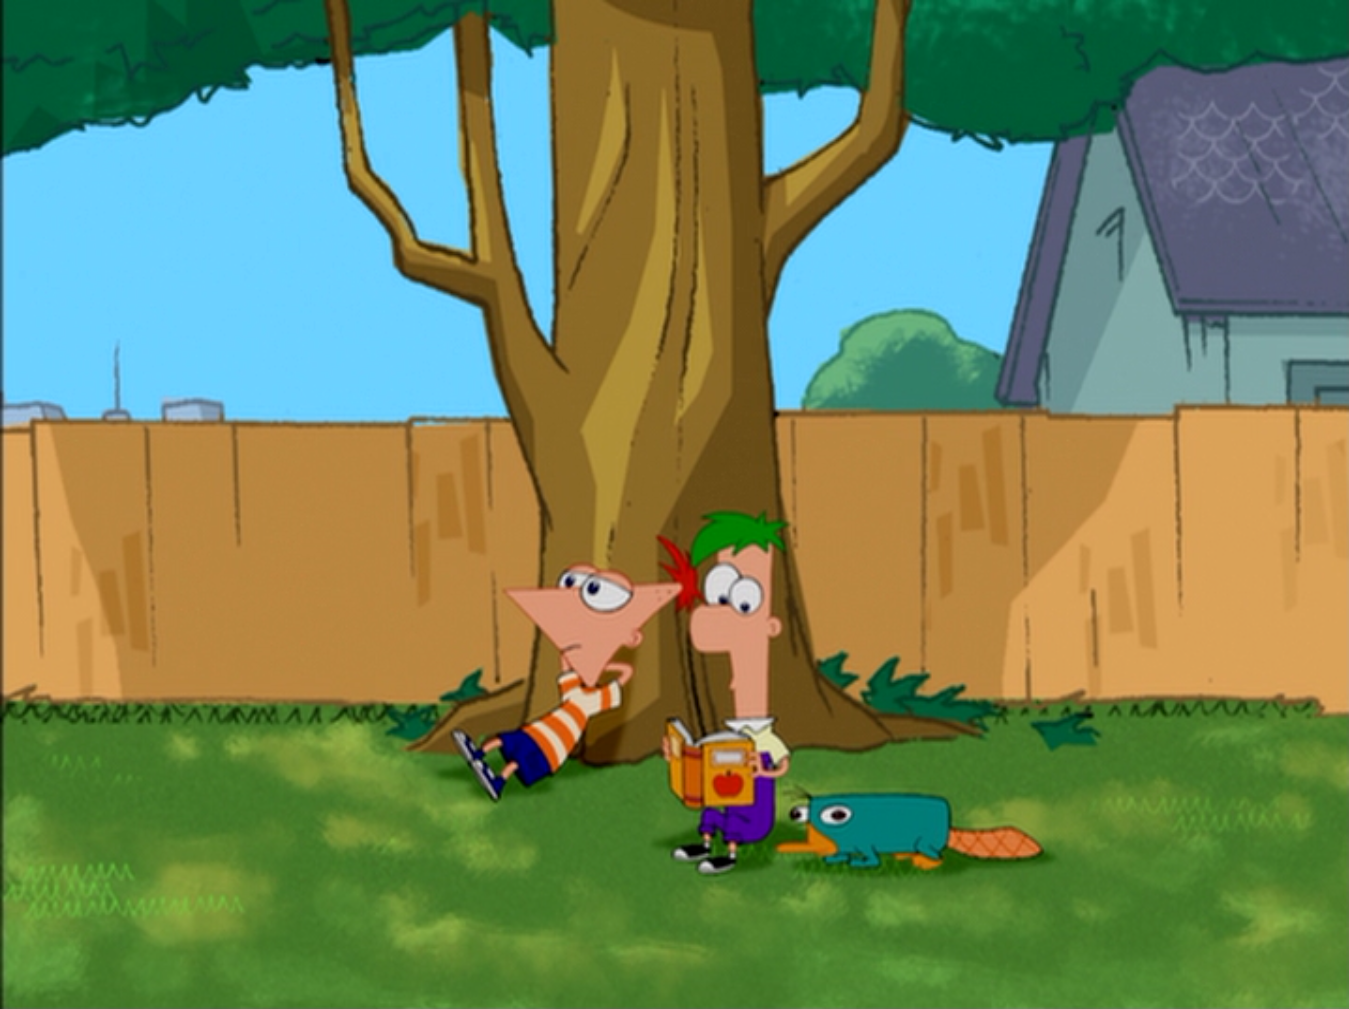 New aNimAtiOn wOrlD: PHINEAS and FERB IMAGES AnD WALLPAPERS